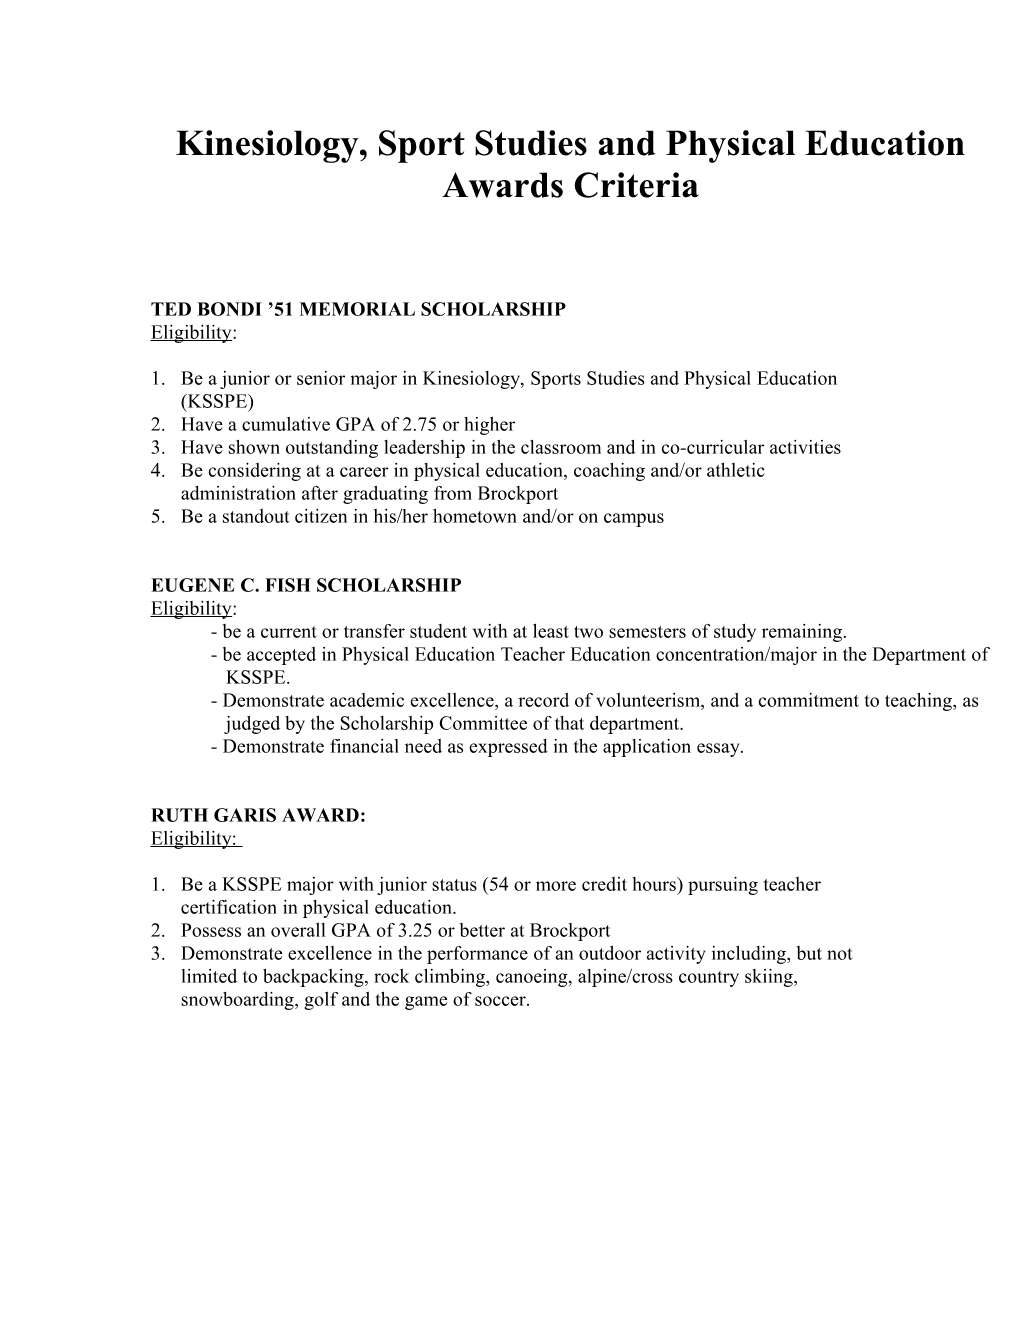 Physical Education and Sport Awards Criteria